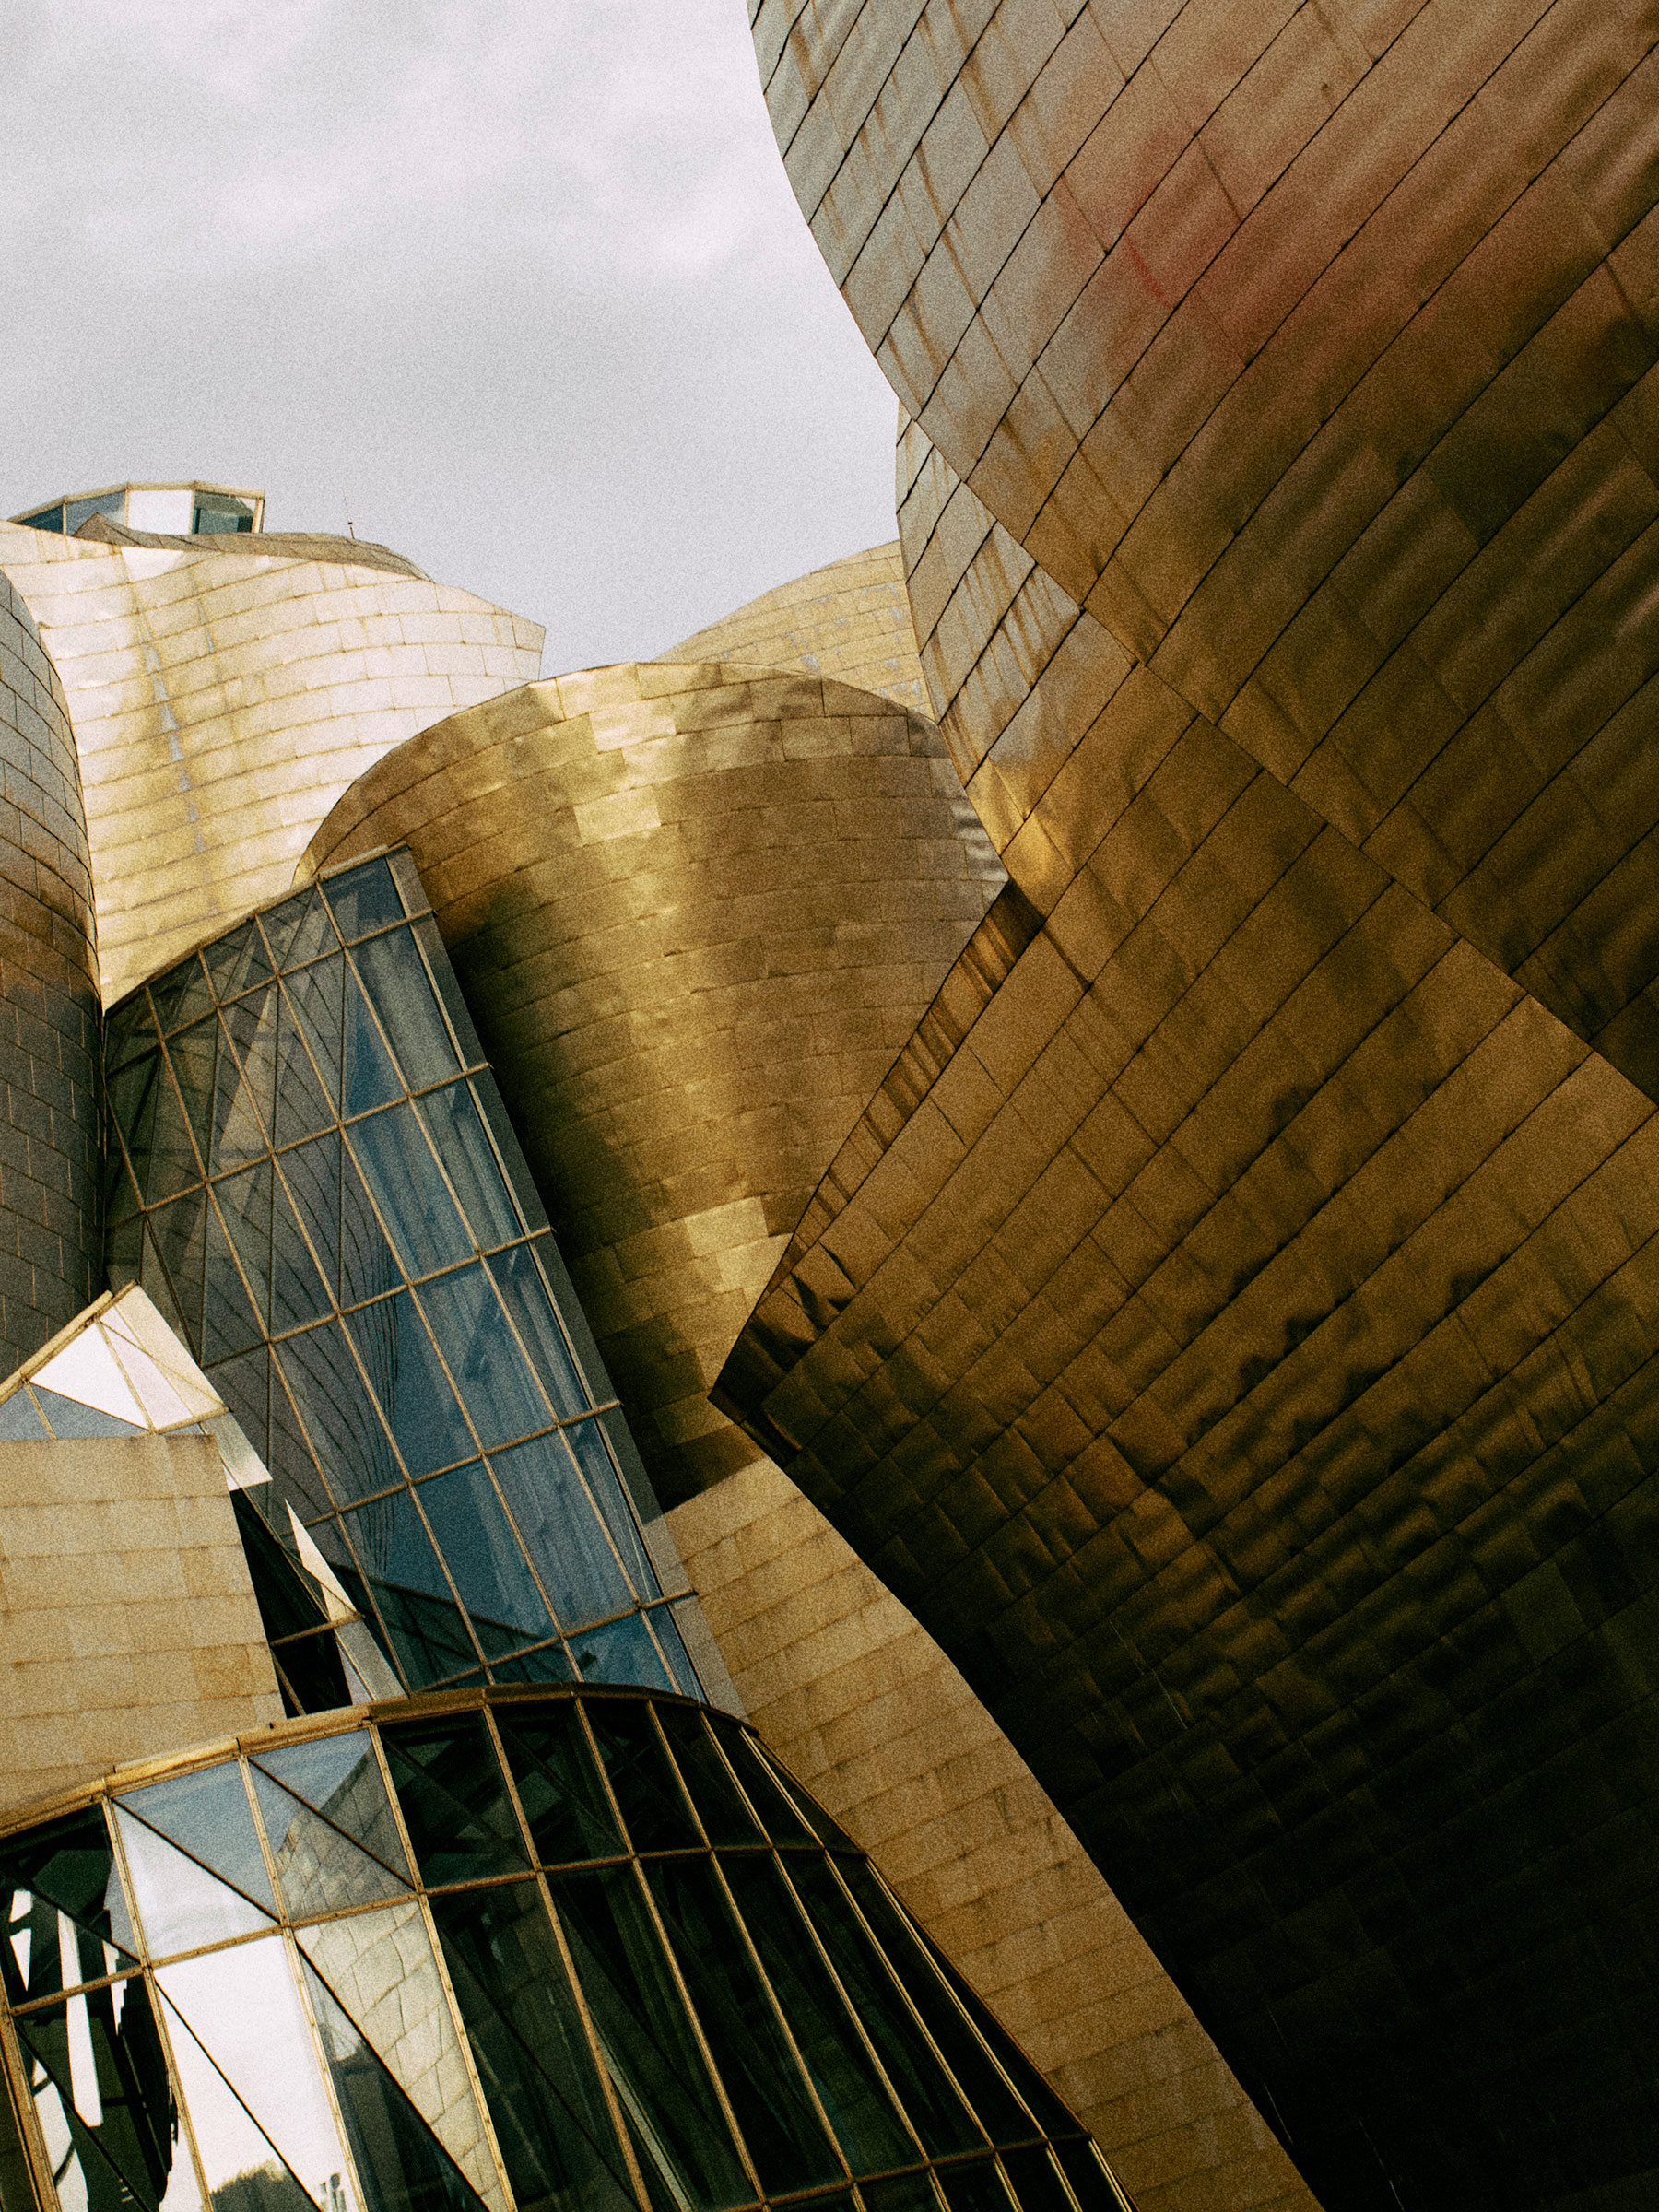 How Frank Gehry Changed Buildings—and Cities—Forever